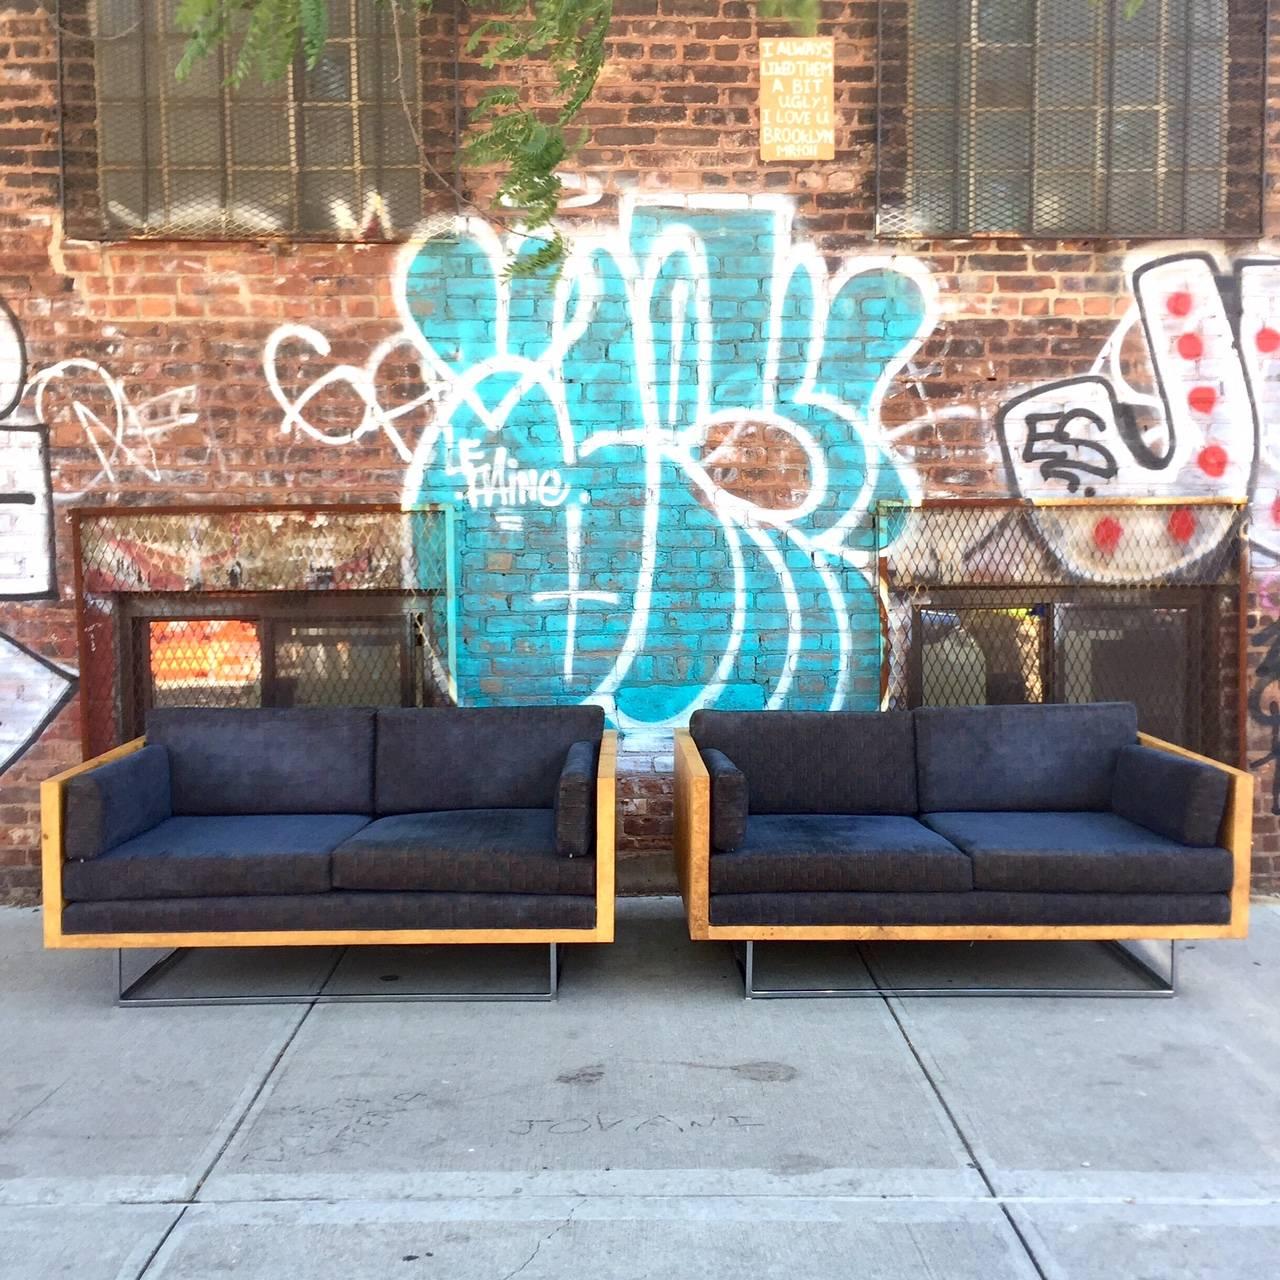 For your consideration is a striking pair of Milo Baughman for Thayer Coggin tuxedo case sofas.

The loveseats are housed in burl wood olive frames and float atop thin chrome bases.

They are in excellent vintage condition.

Ready for a light